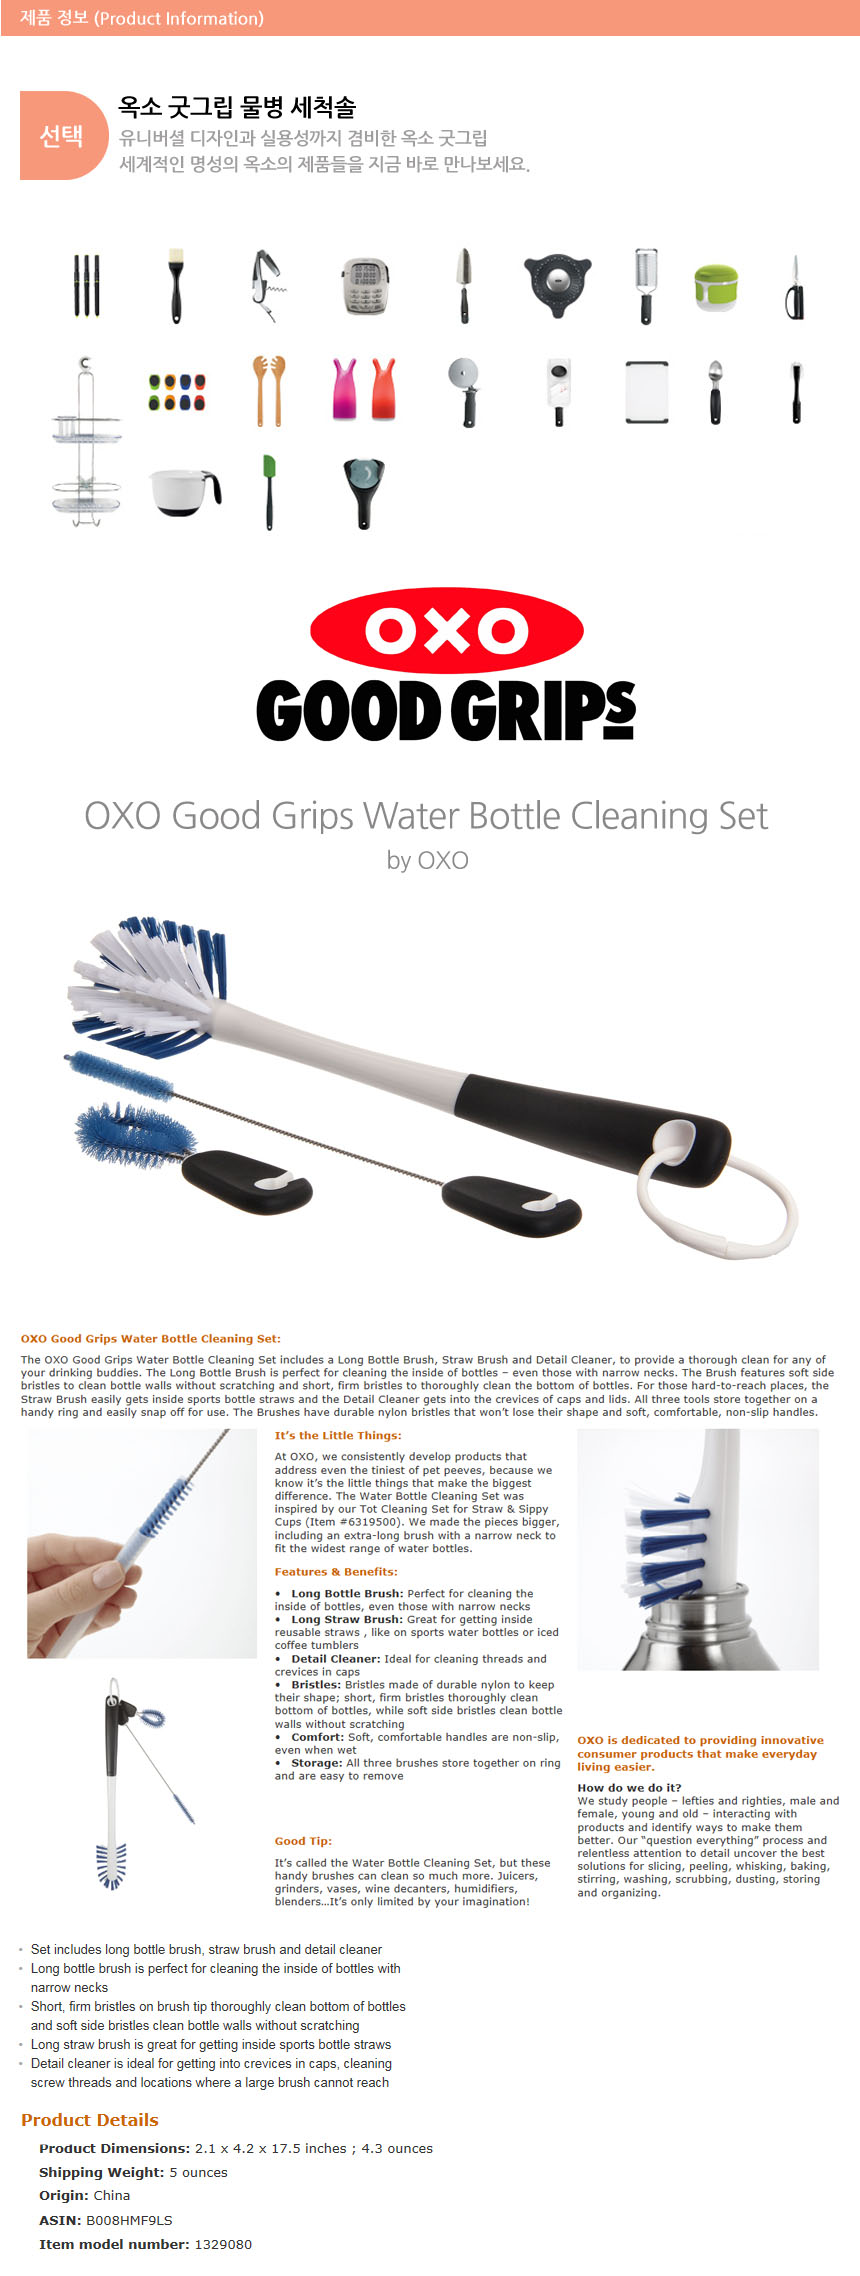 http://dillymall.godohosting.com/Oxo/Oxo_Goodgrips_Water_Bottle_Cleaning_Set.jpg